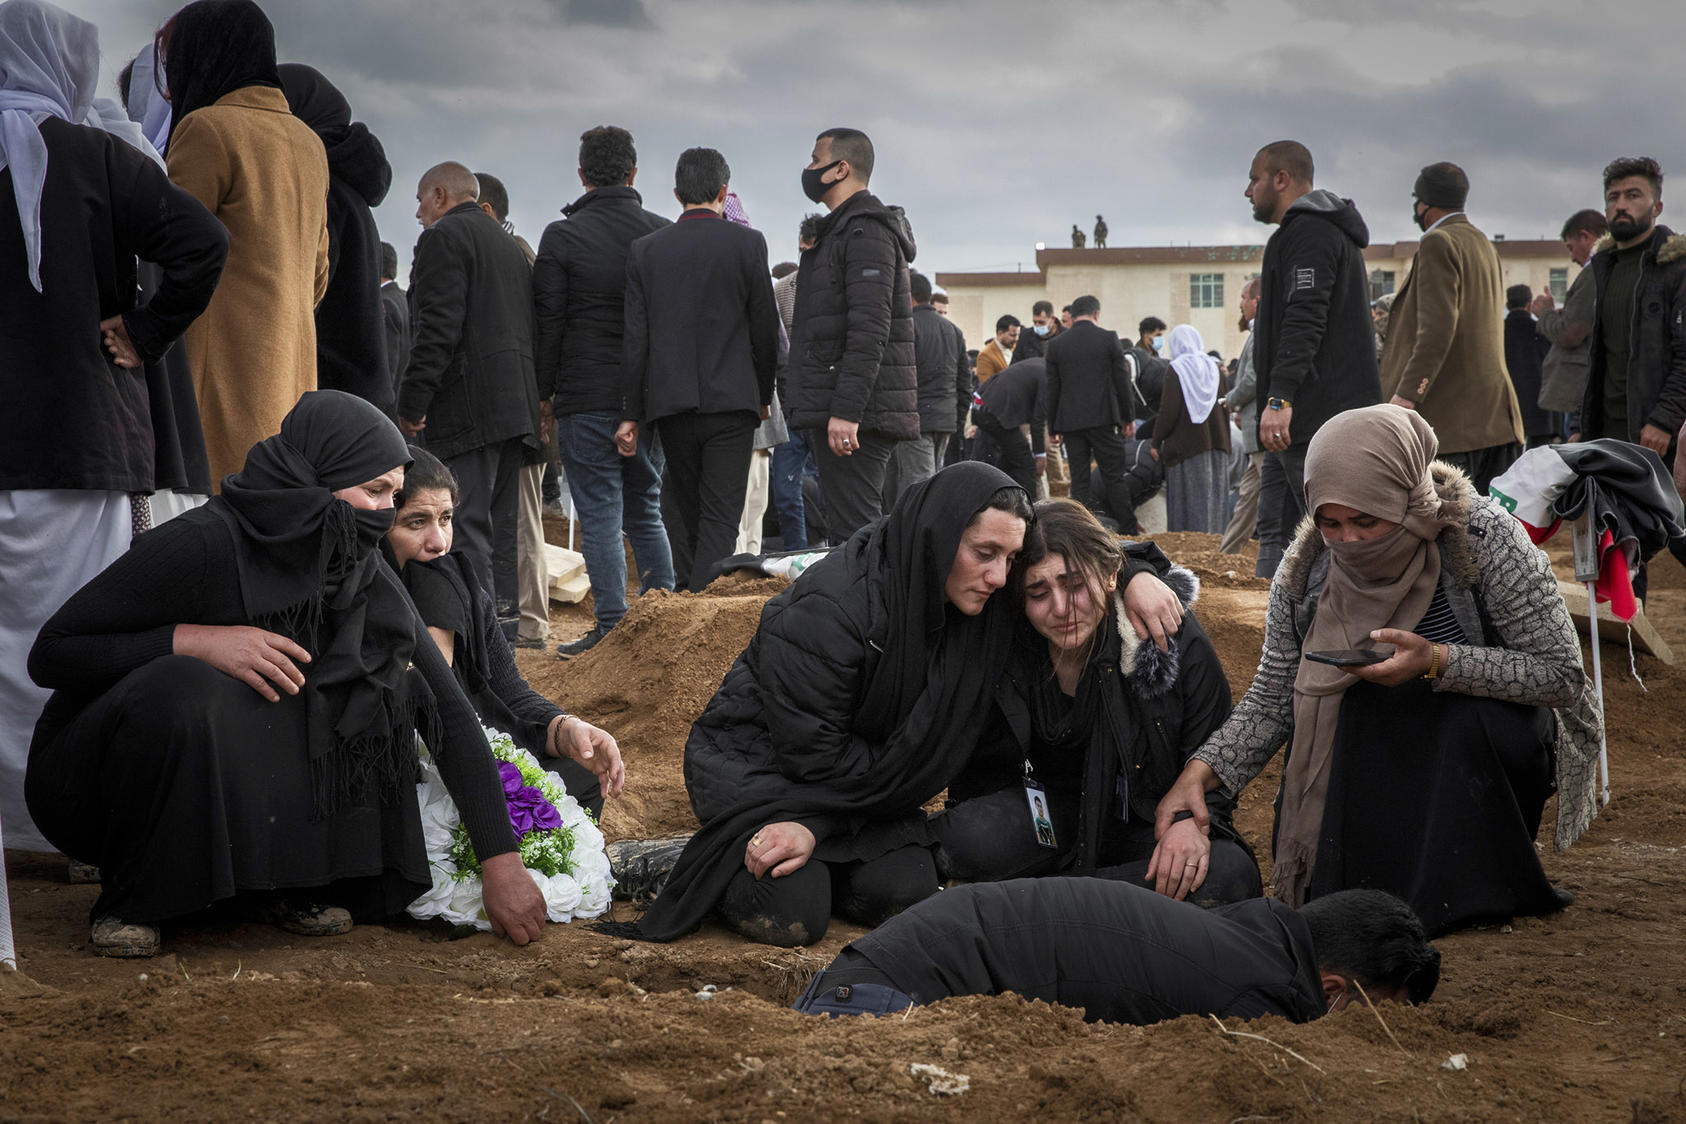 Relatives of Iraqi Yazidis killed by ISIS comfort each other last year during re-burials of 103 bodies found in a mass grave. Yazidis and other minorities still struggle for representation in Iraq’s government. (Ivor Prickett/The New York Times)